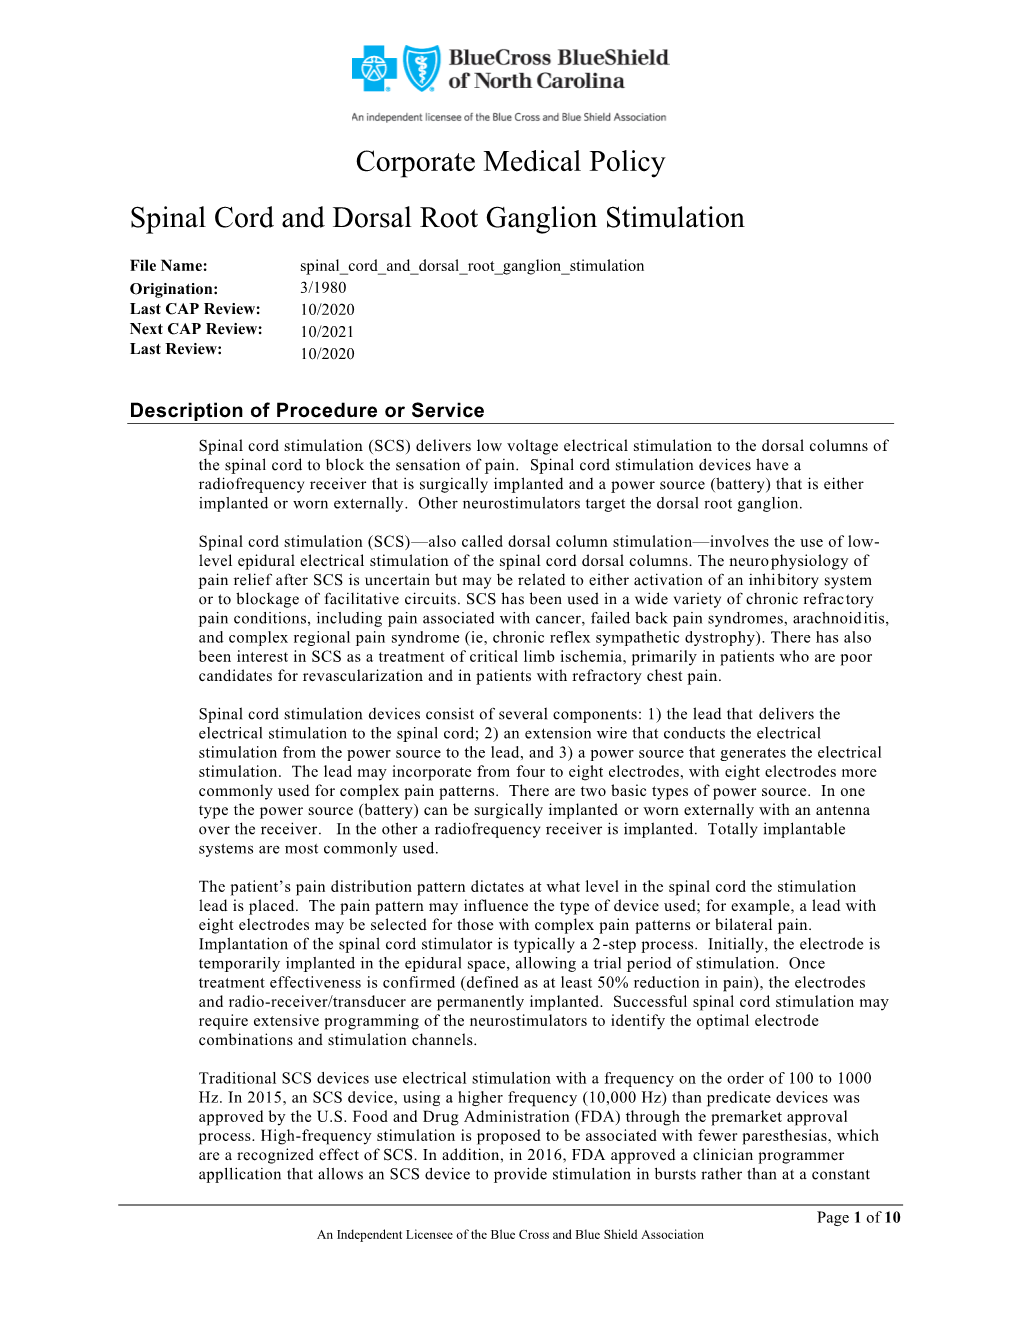 Spinal Cord and Dorsal Root Ganglion Stimulation